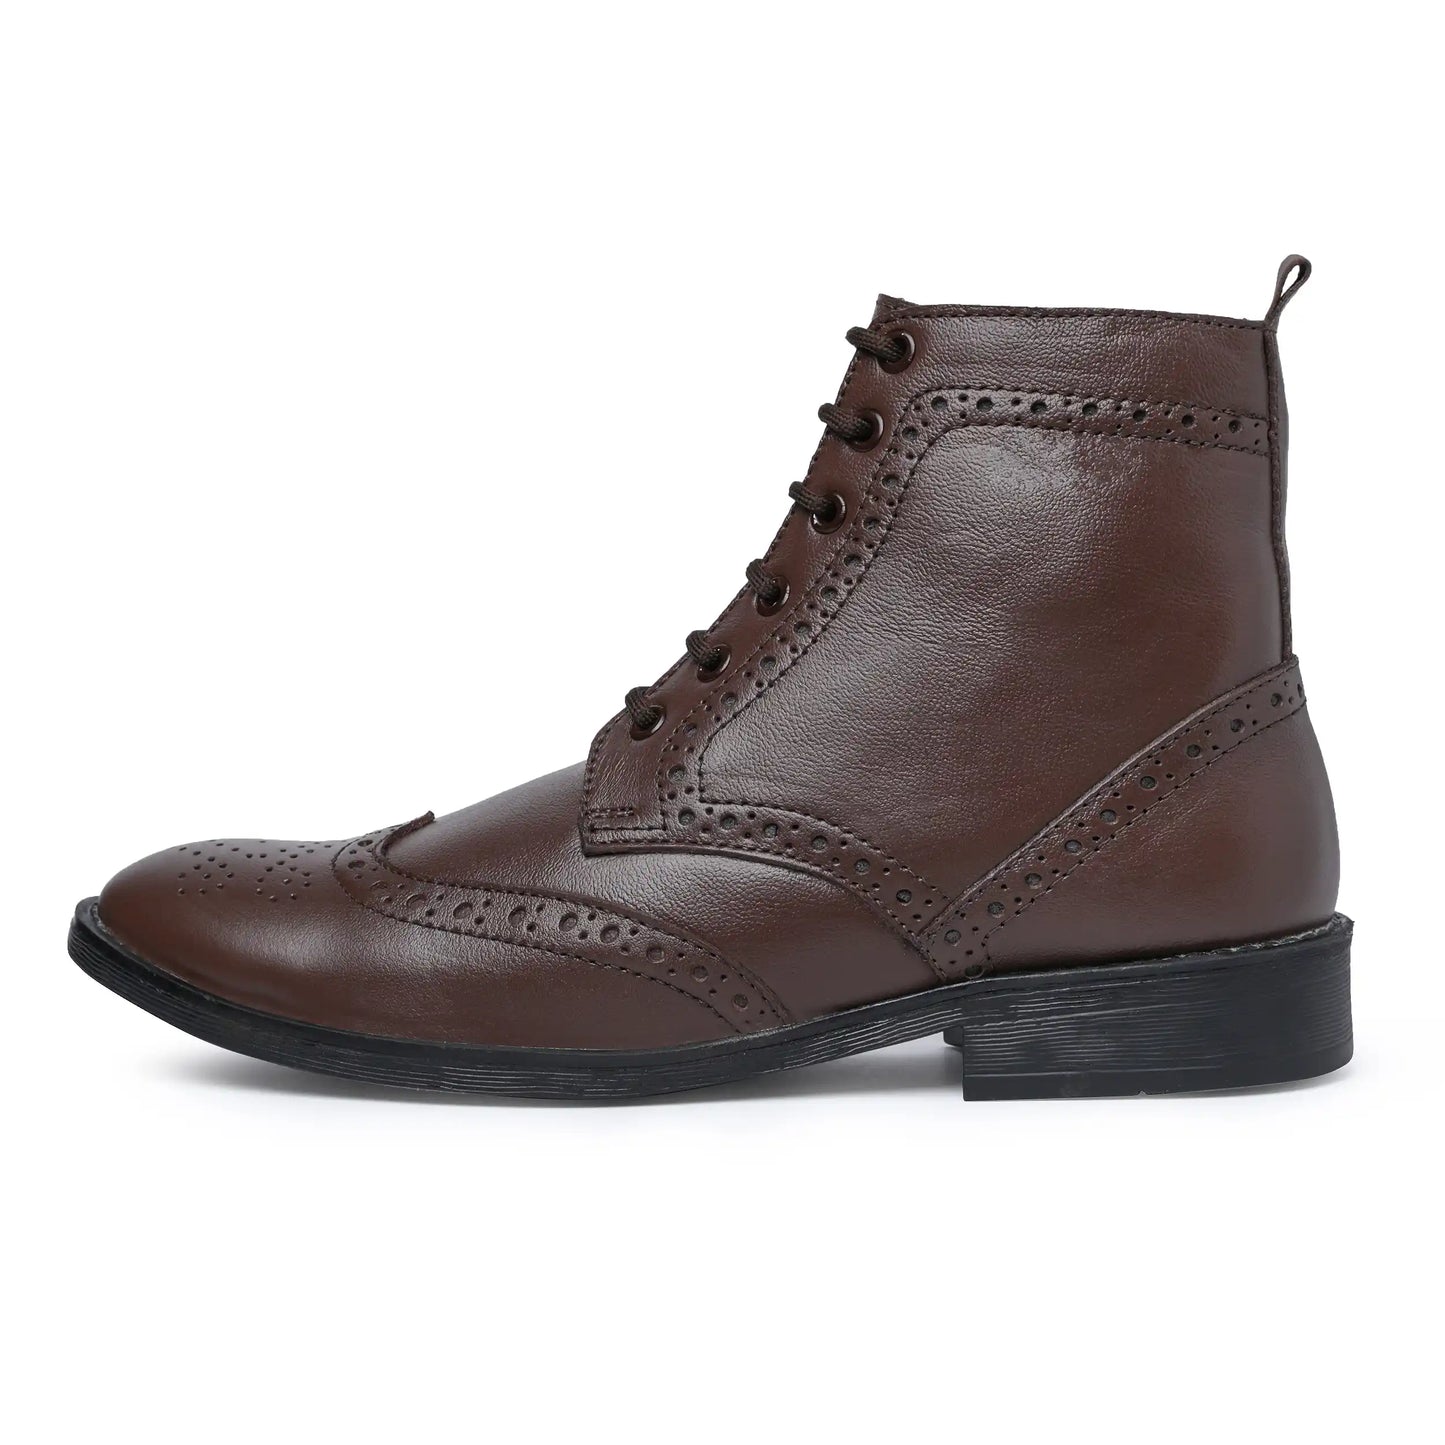 Men Pure Leather Brogue Boots